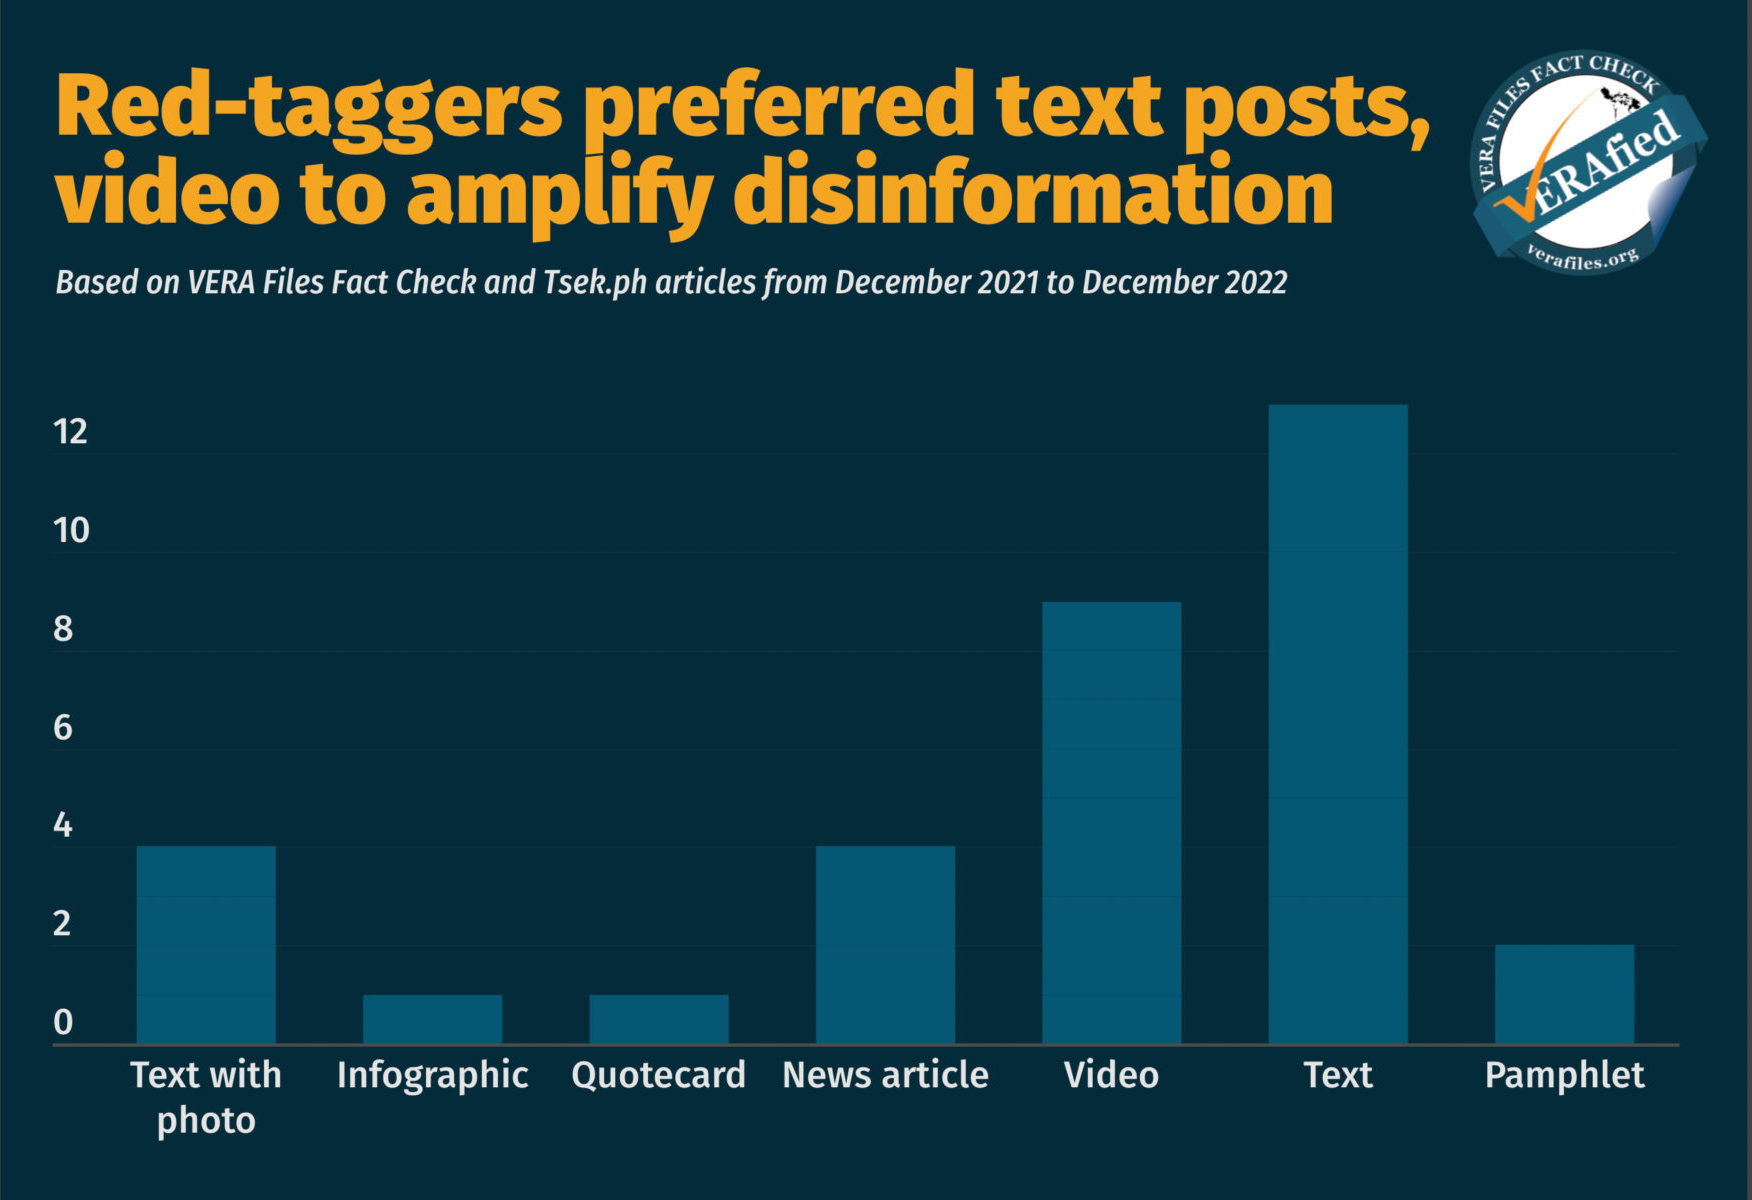 Red-taggers preferred text posts, videos to amplify disinformation